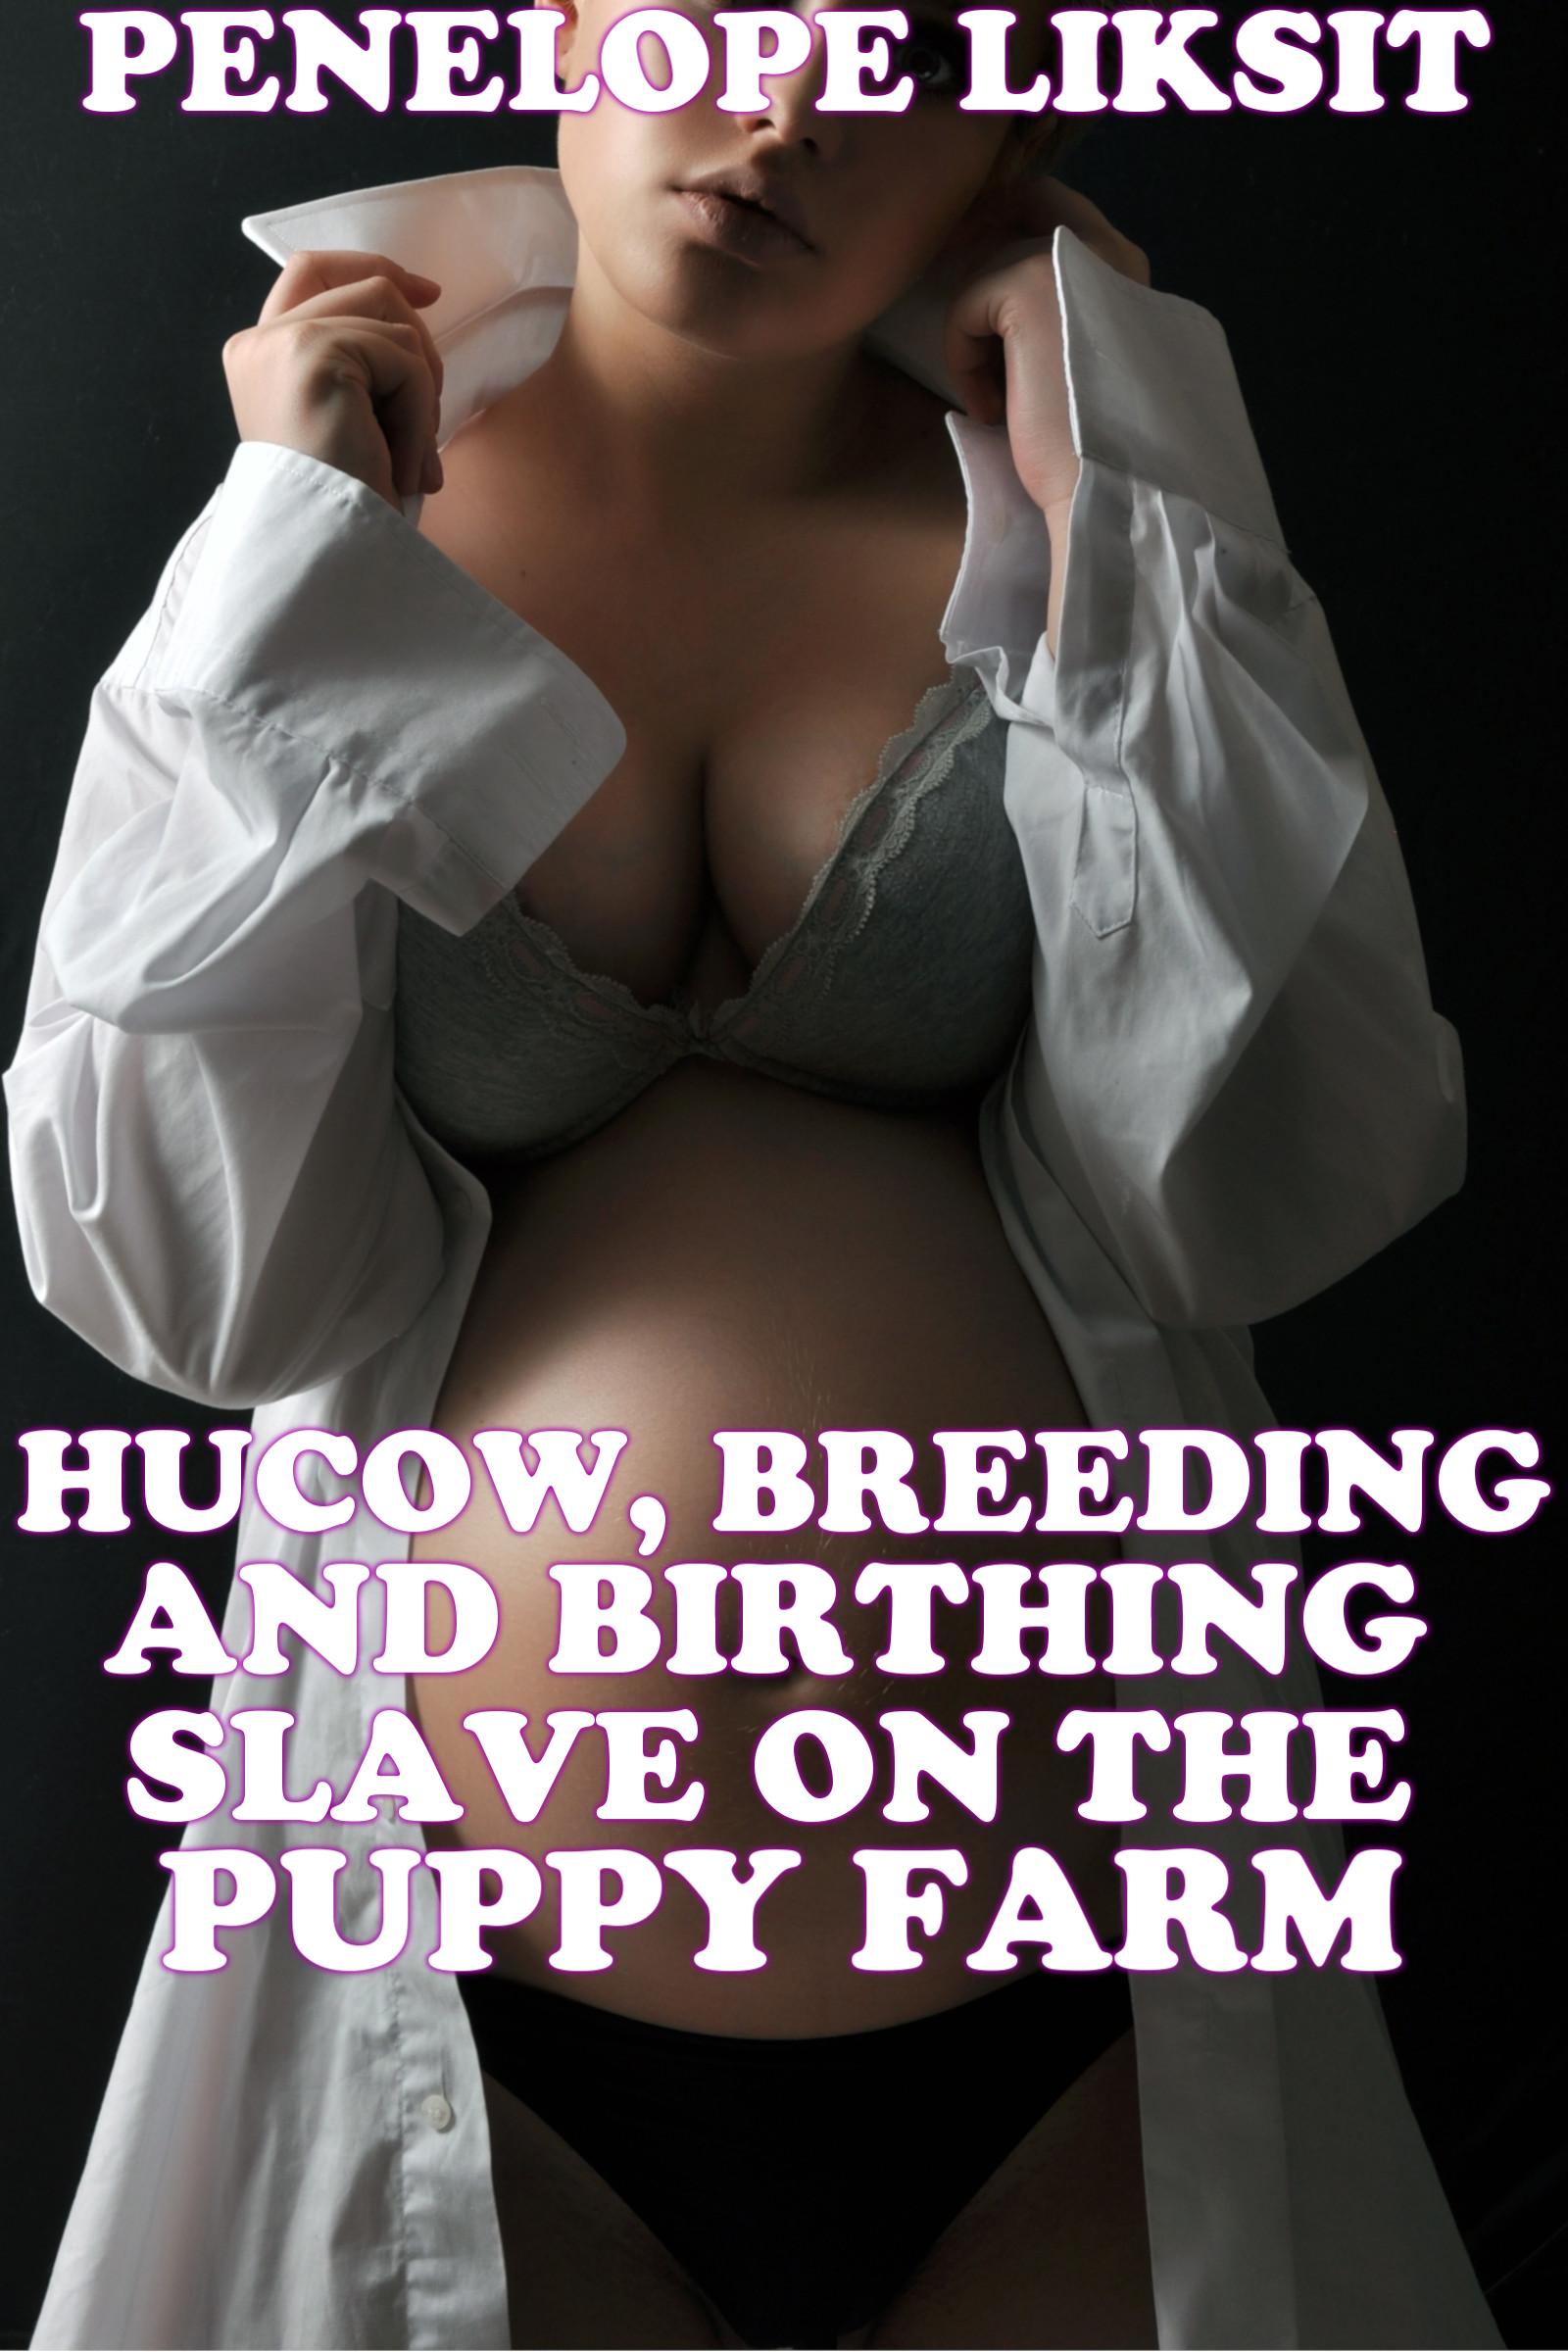 Hucow breed